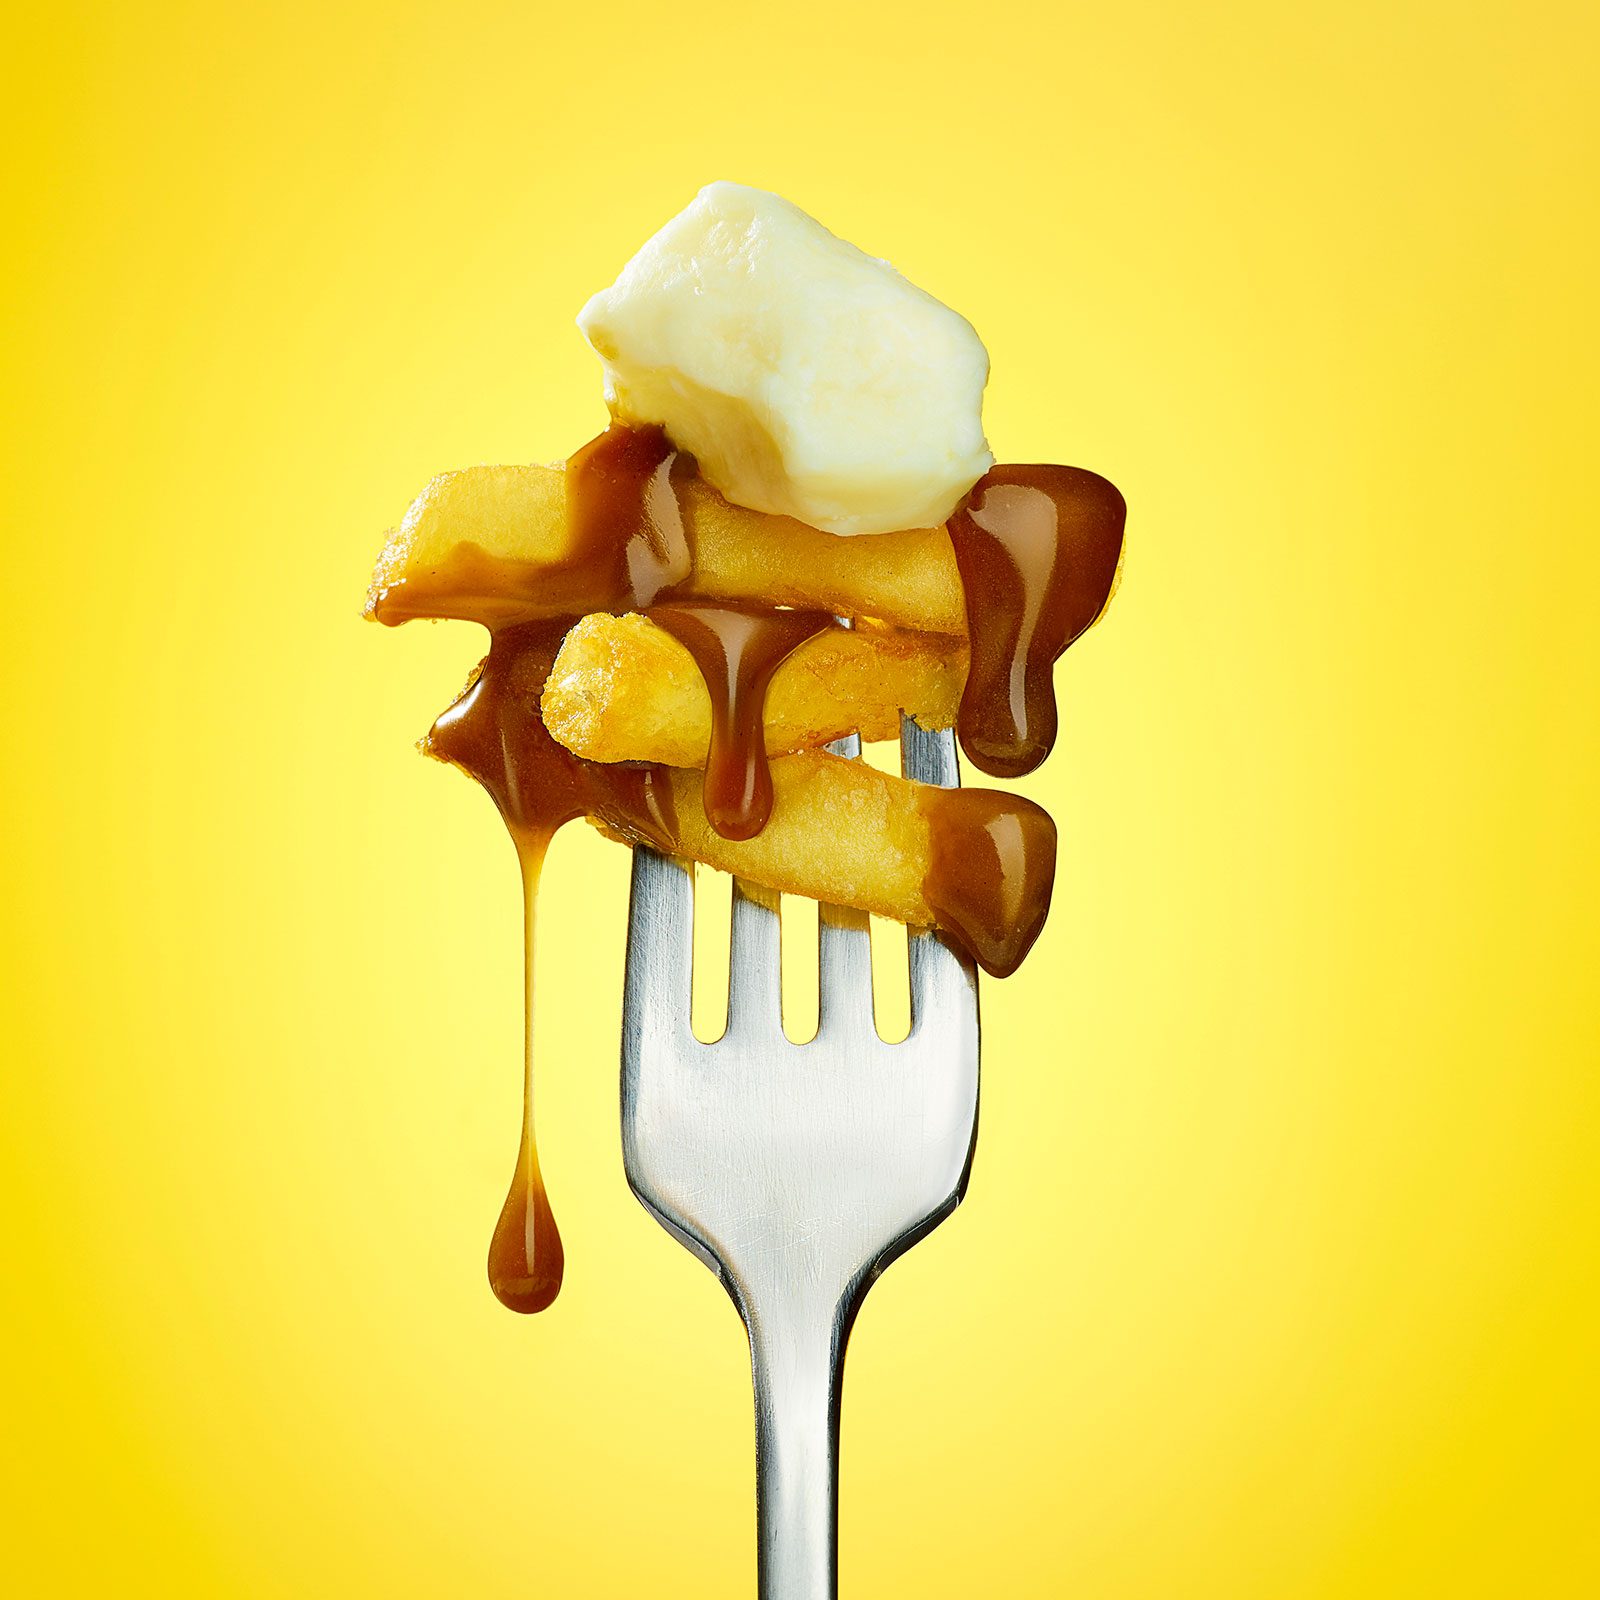 A forkful of poutine, dripping gravy